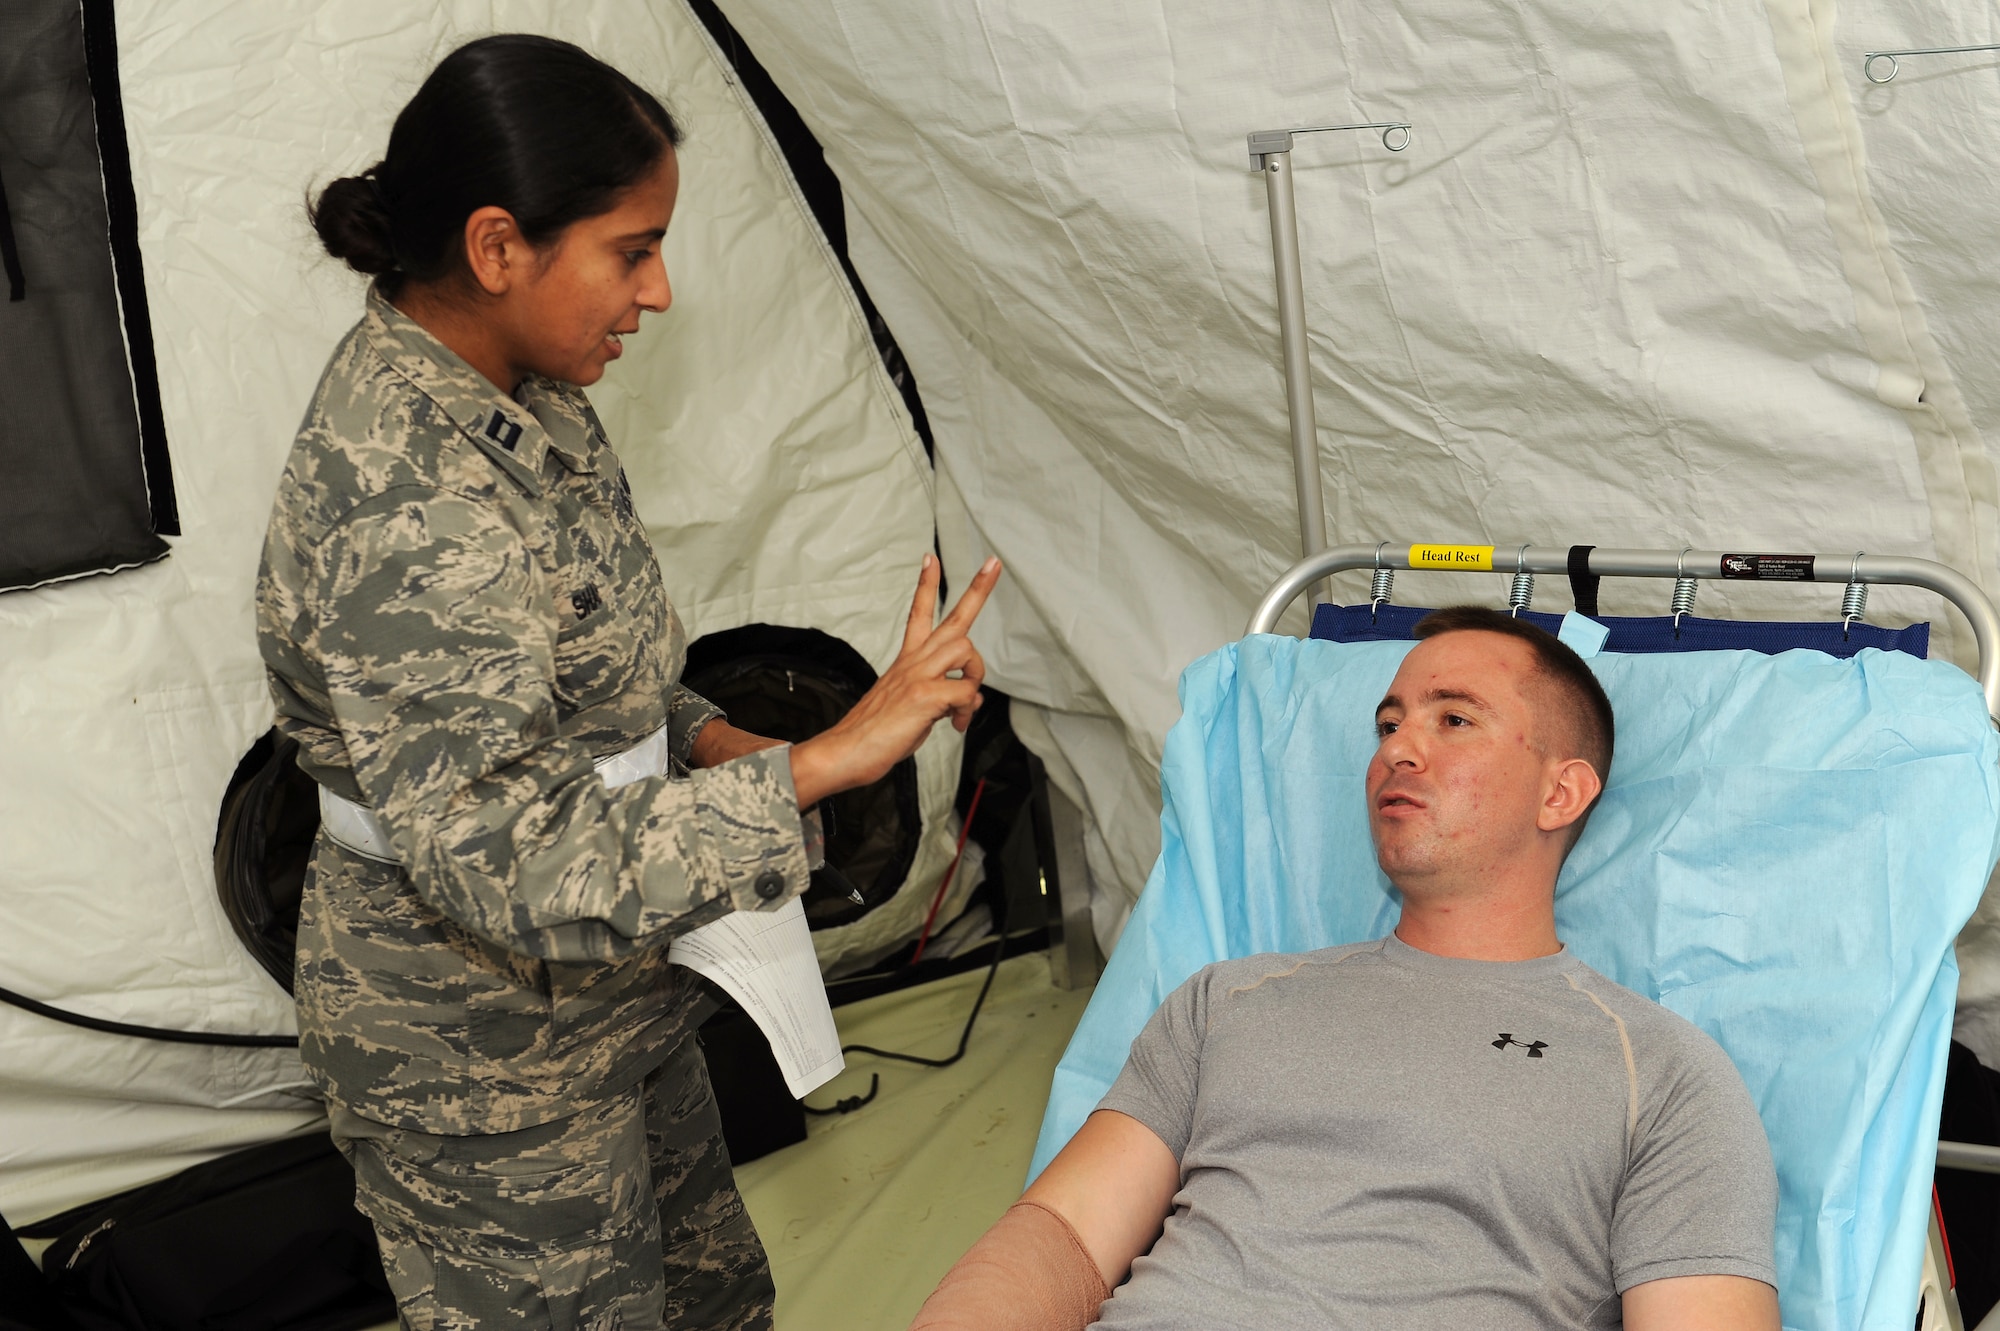 U.S. Air Force Capt. Pina Shah, 18th Medical Group clinical nurse, conducts a vision test on a mock patient to see how responsive he is after a simulated injury on Kadena Air Base, Japan, Aug. 18, 2015. Medical personnel from Misawa Air Base, Japan, Joint Base Lewis-McChord, Wash., and Camp Bullis, Texas supported the En-Route Patient Staging System exercise hosted by Kadena’s 18th Wing. (U.S. Air Force photo by Airman 1st Class Zade C. Vadnais)